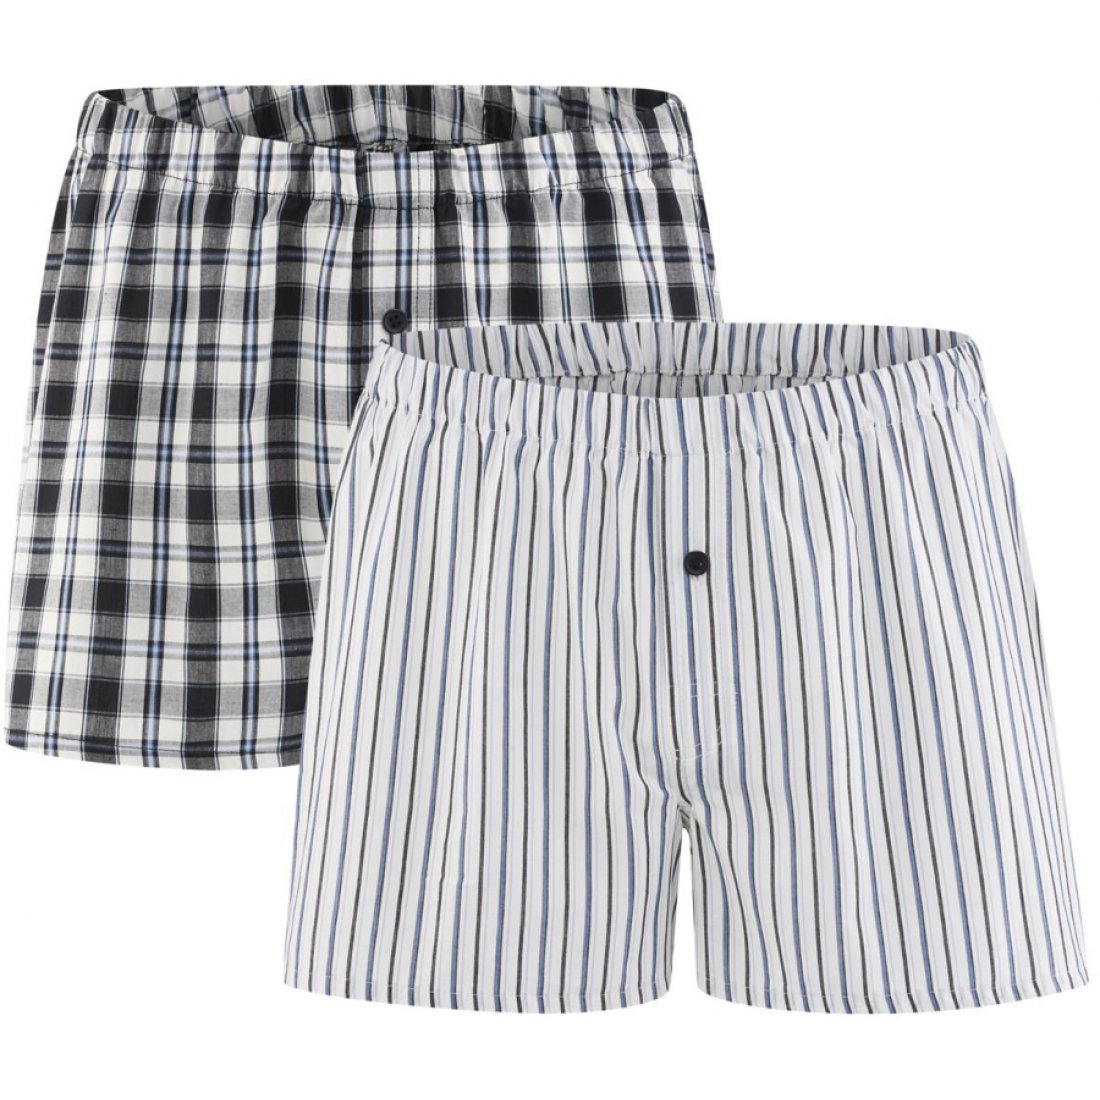 Organic Cotton Woven Gregor Boxer Shorts - Pack of 2 - Natural ...